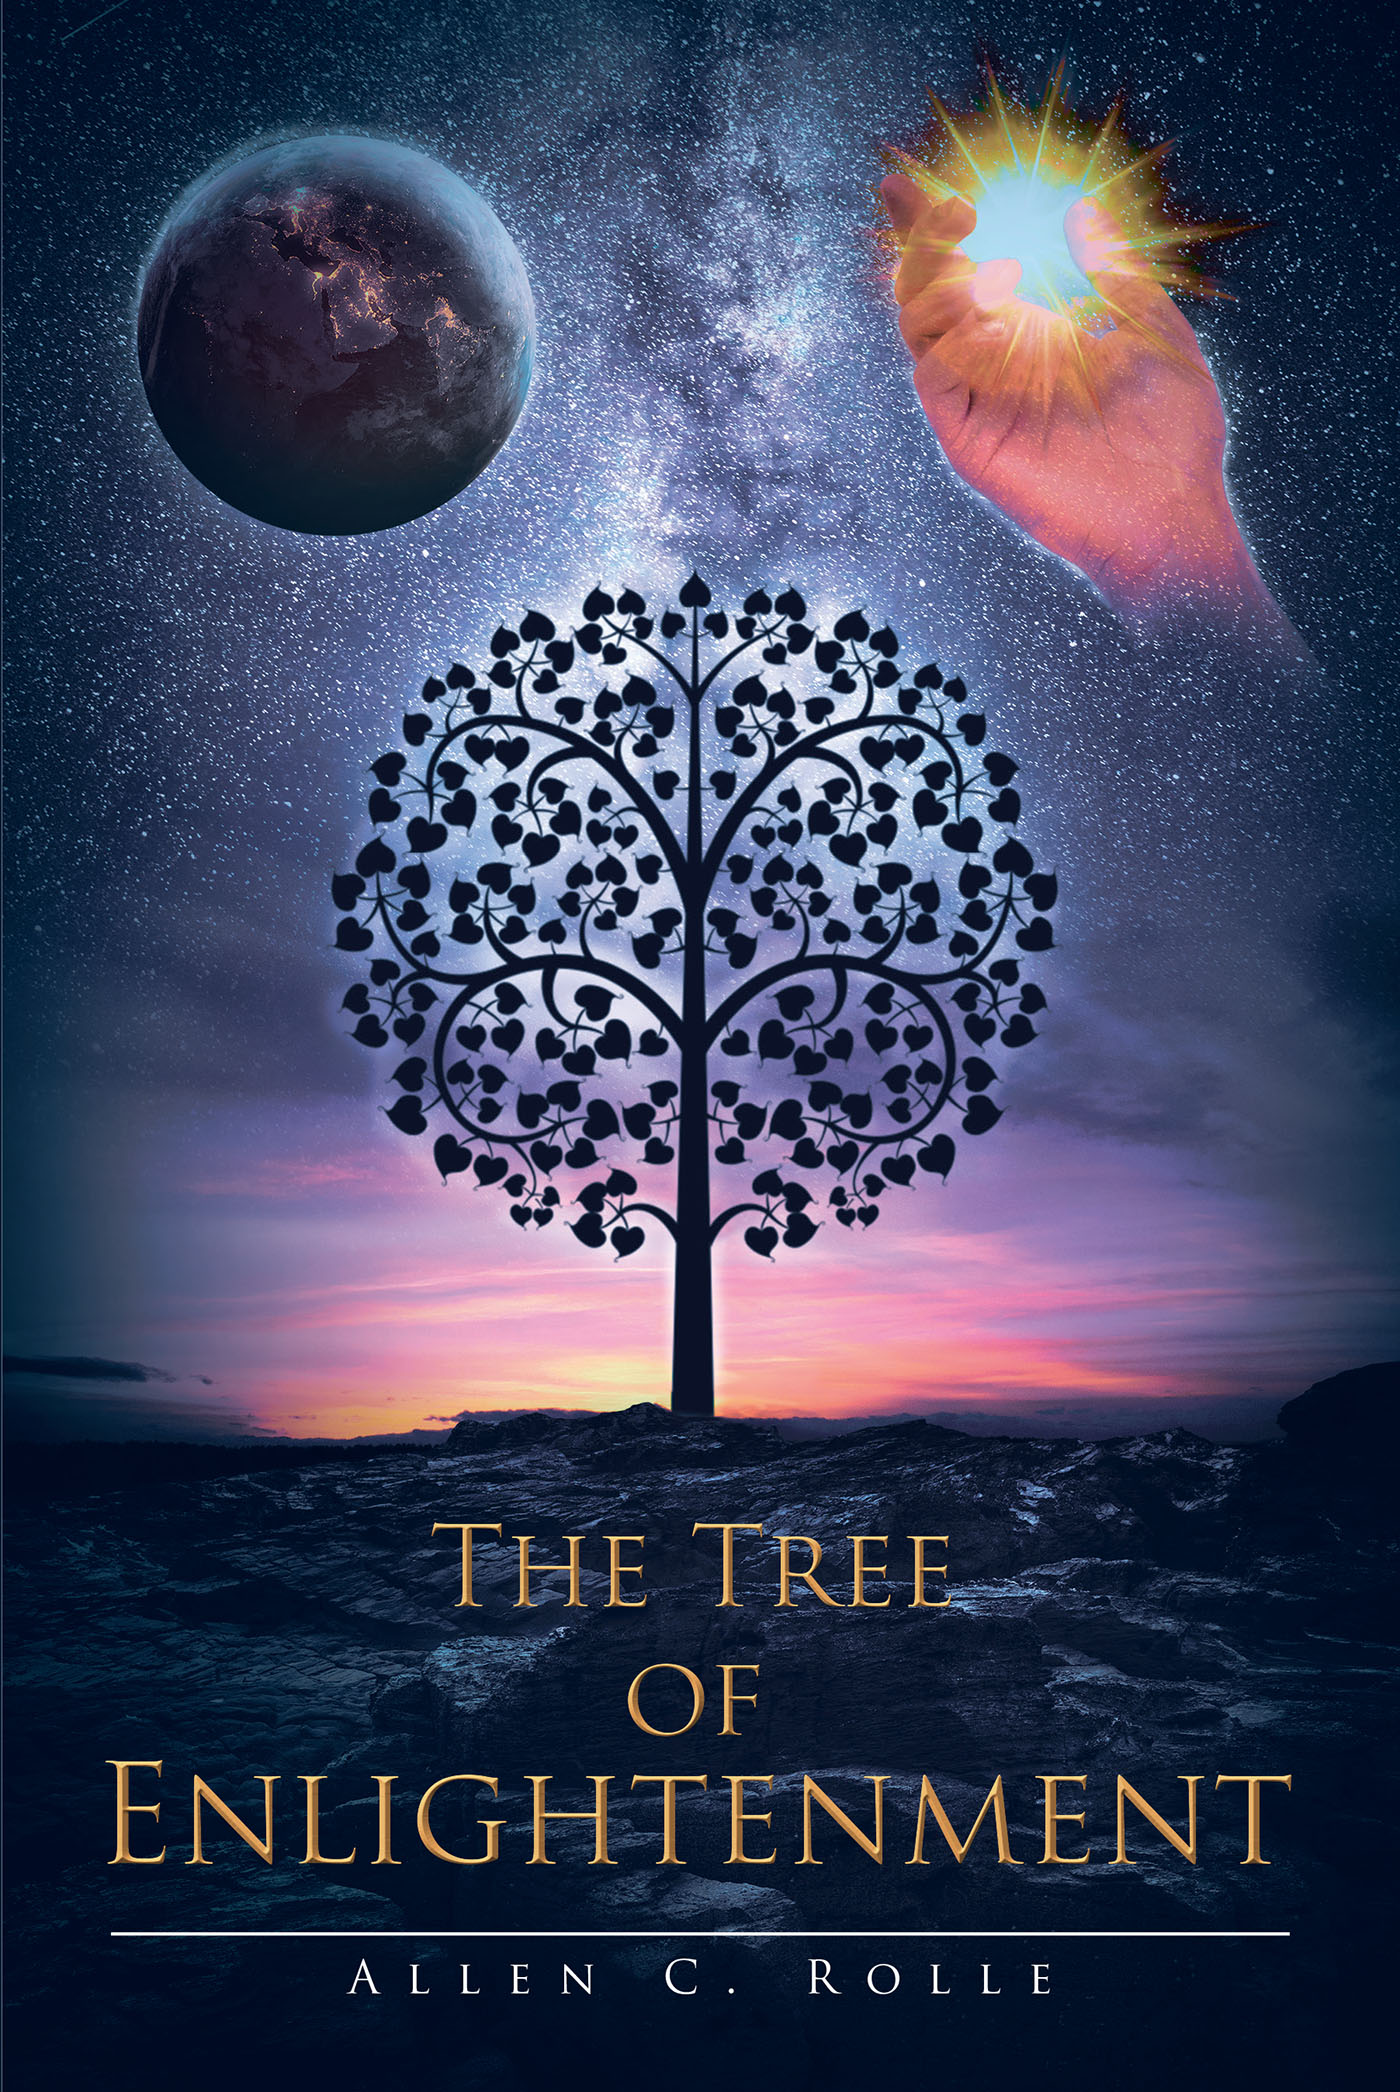 Author Allen Rolle’s New Book, “THE TREE OF ENLIGHTENMENT,” Follows a Group of Birds Whose Lives Are Forever Changed by a Special Tree That Helps Them Learn and Grow